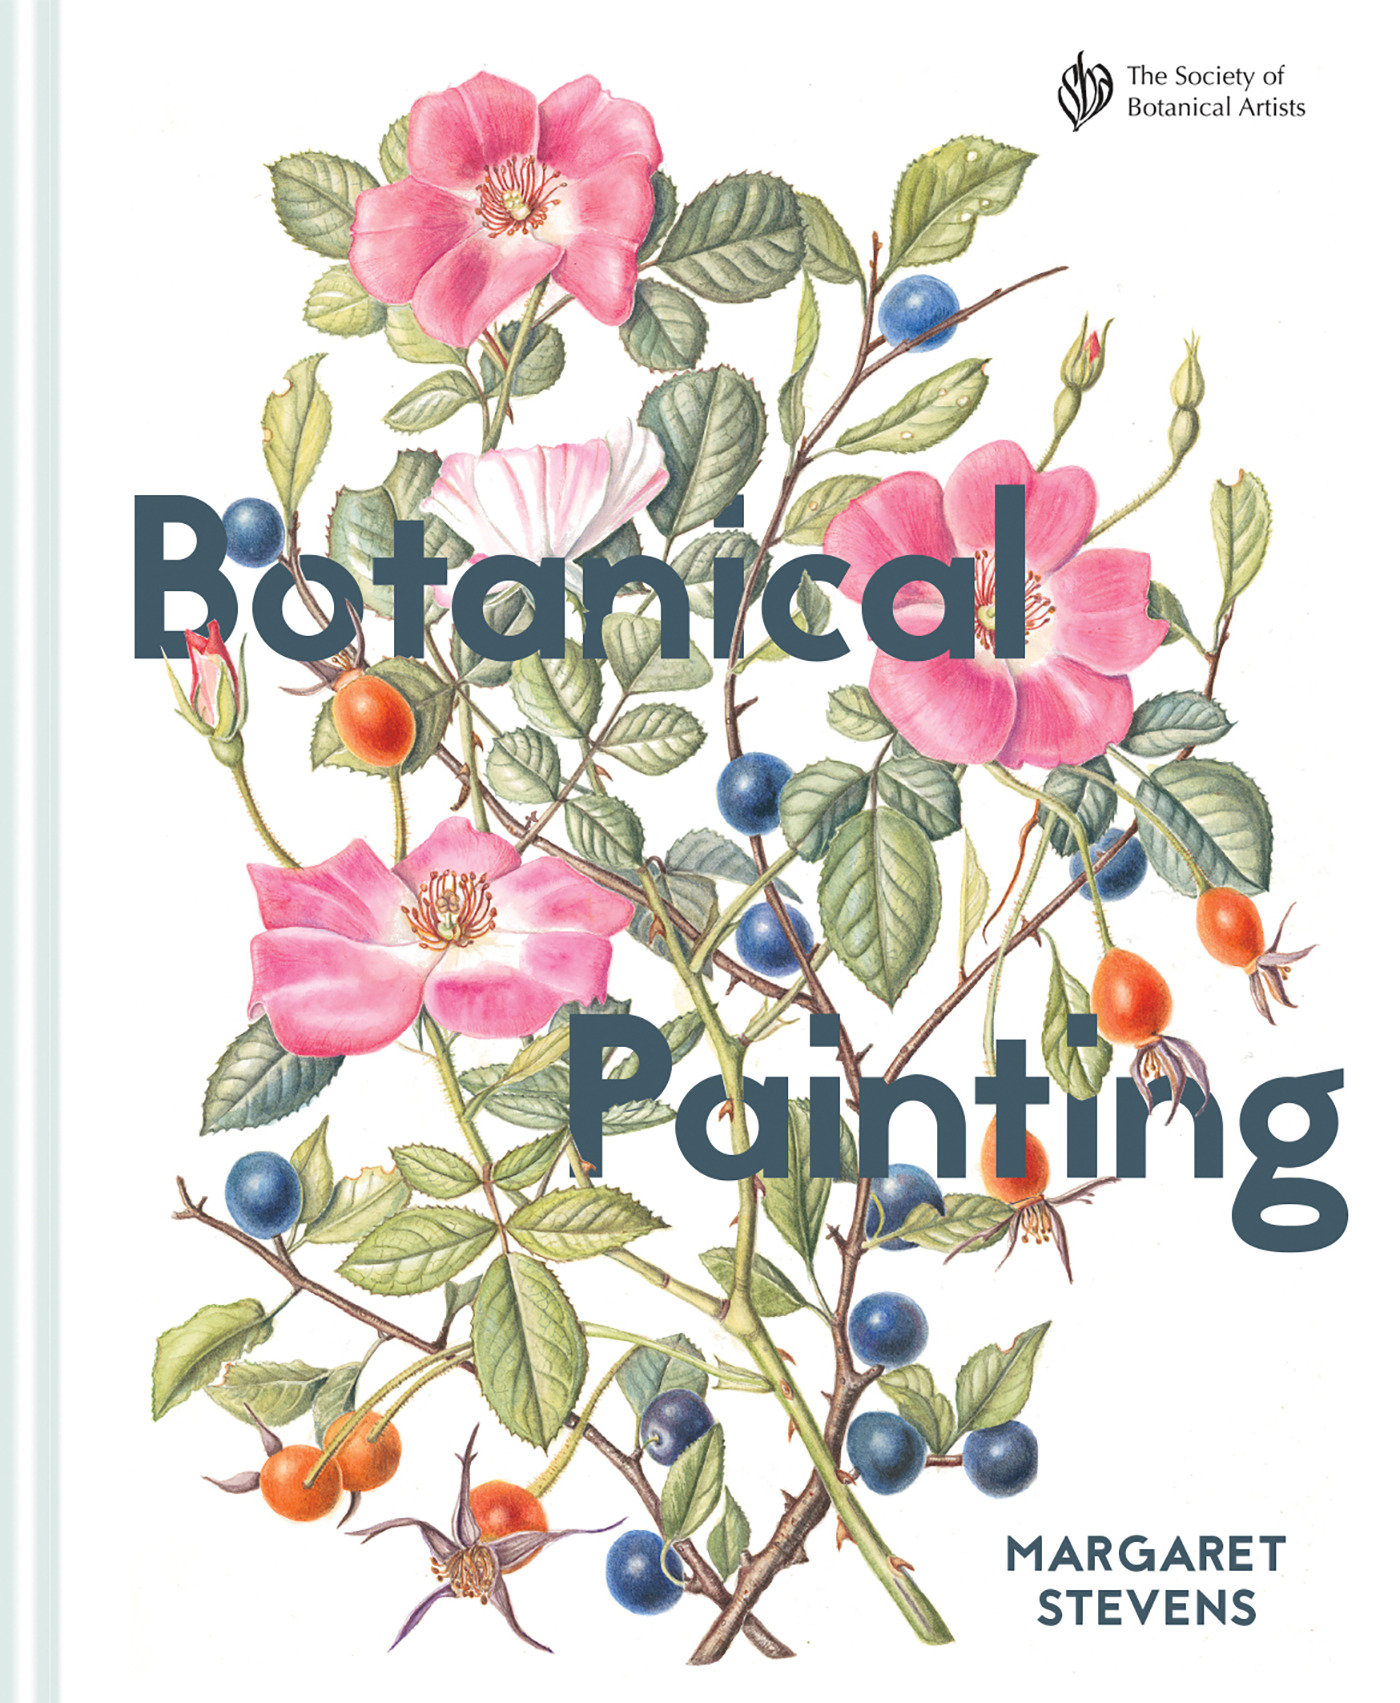 Botanical Painting With The Society Of Botanical Artists (Hardcover Book)